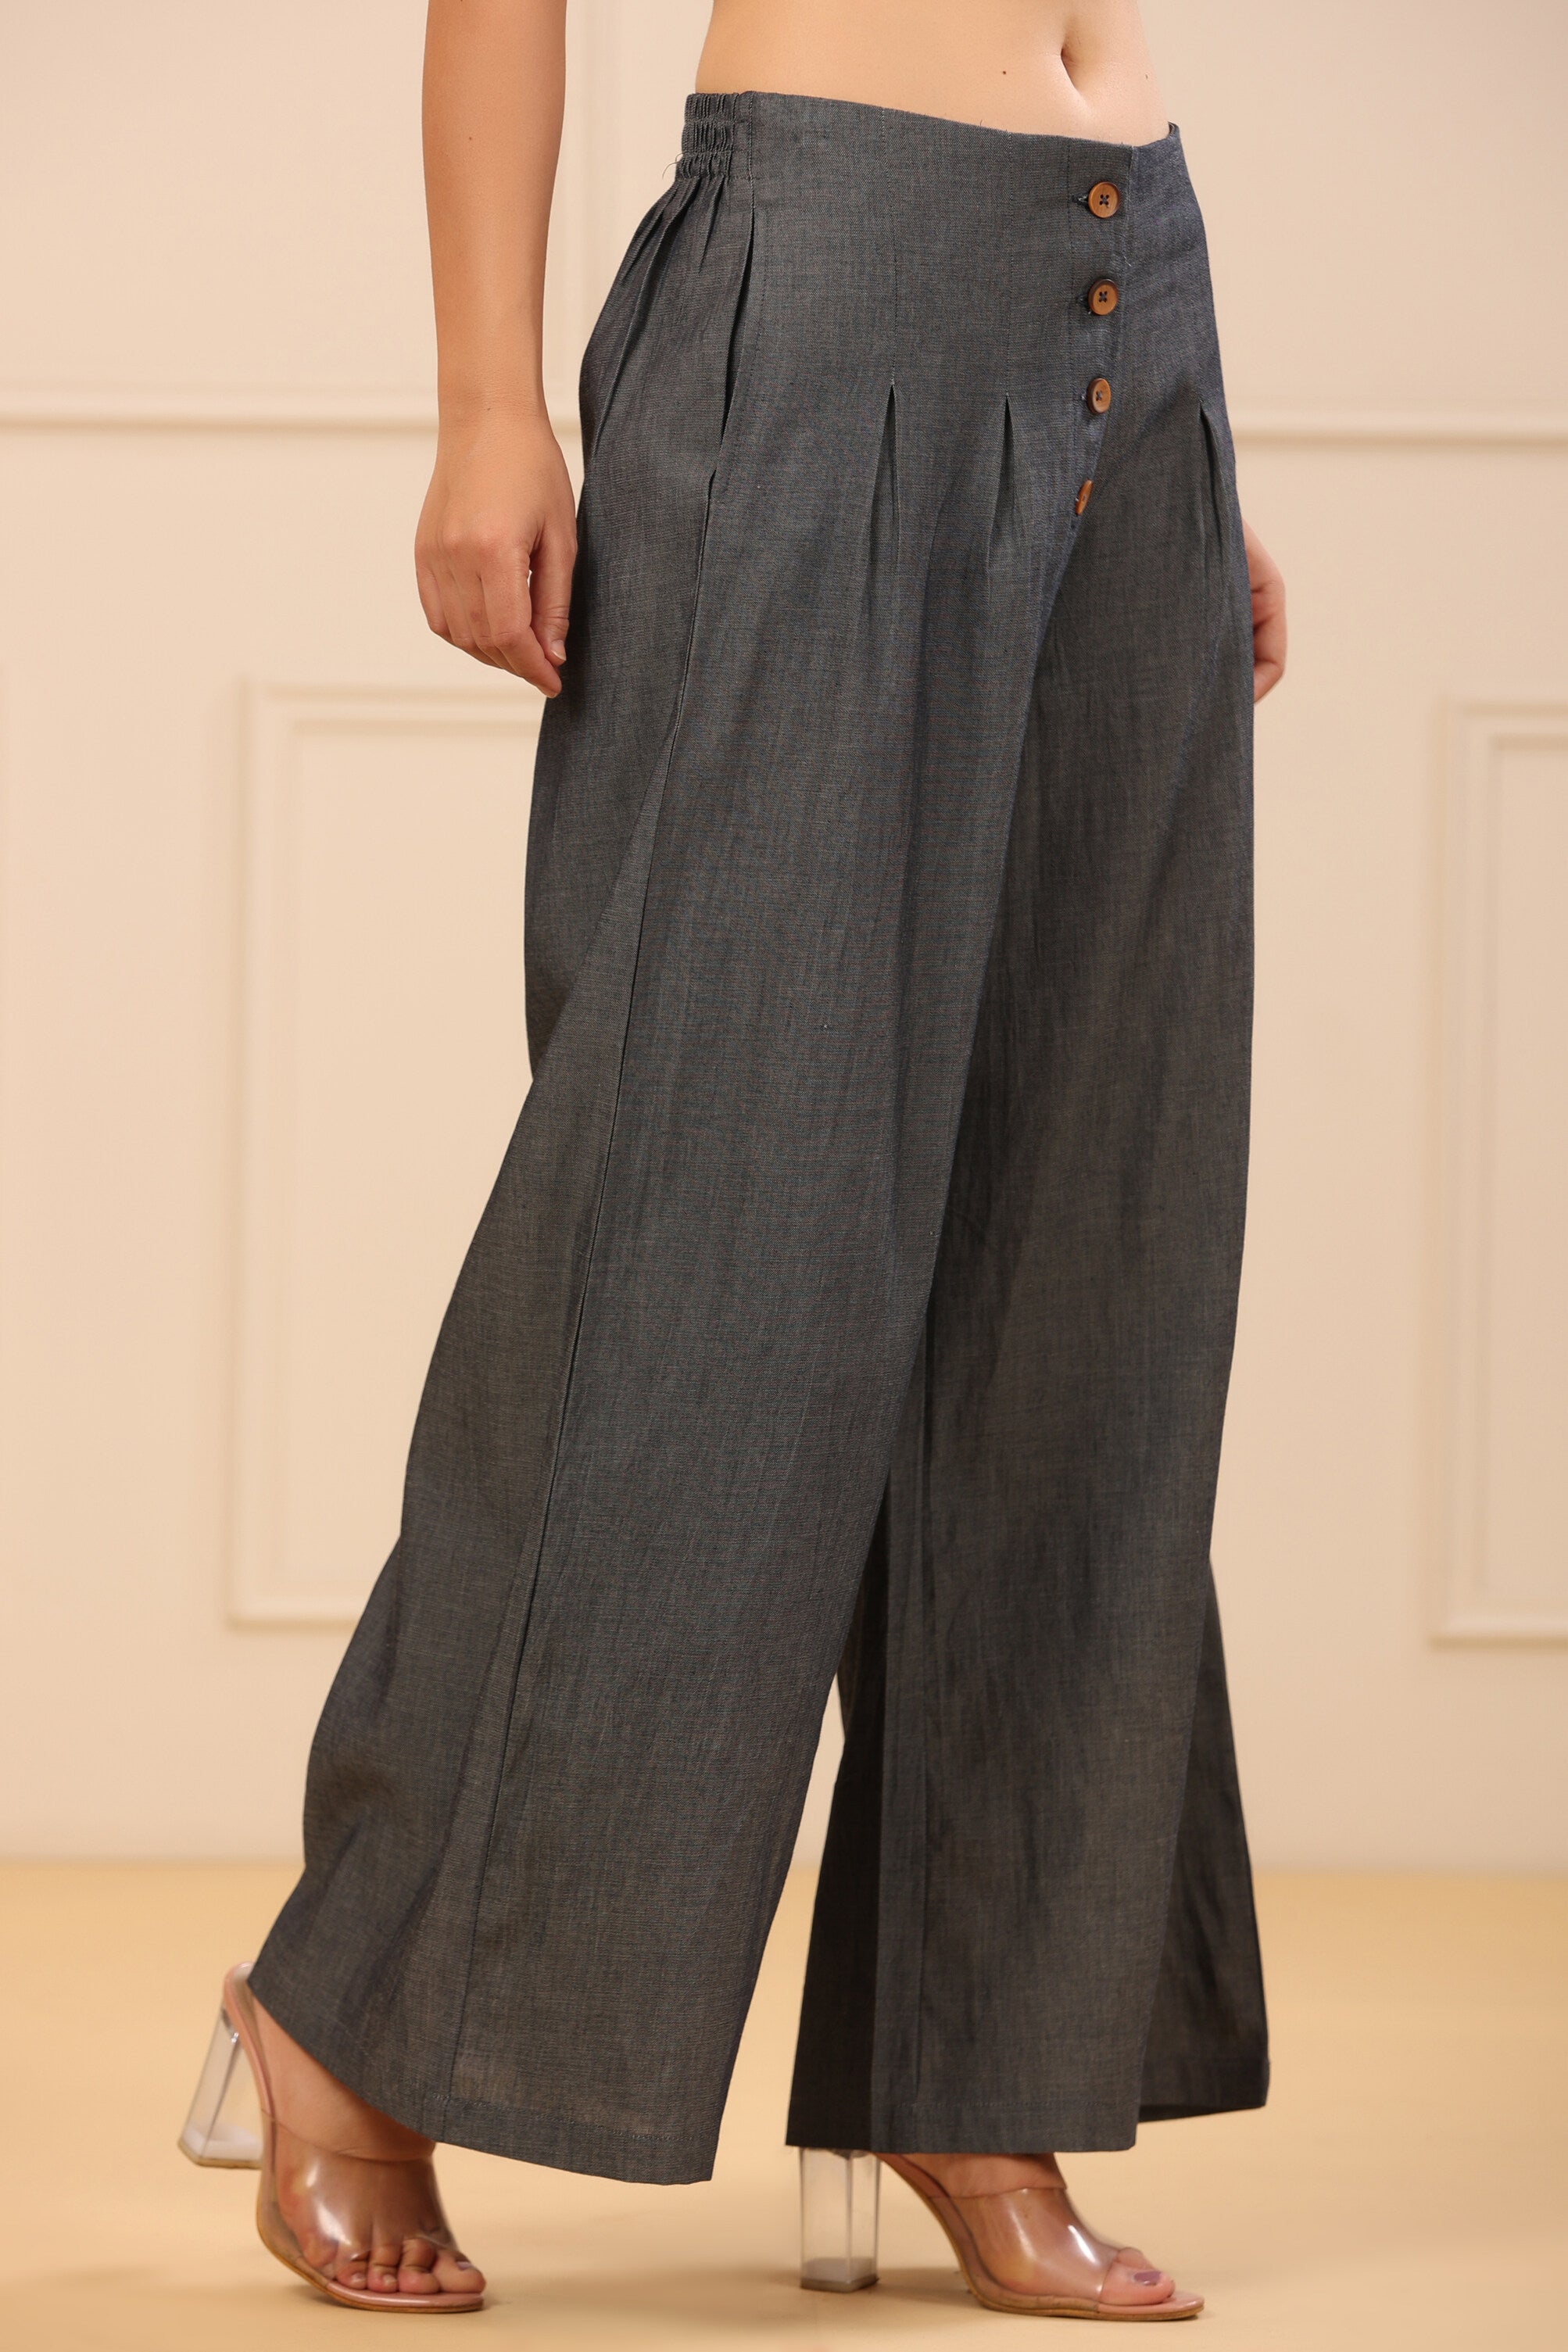 Palazzo Pants for Summer — Loose, Lightweight Styles